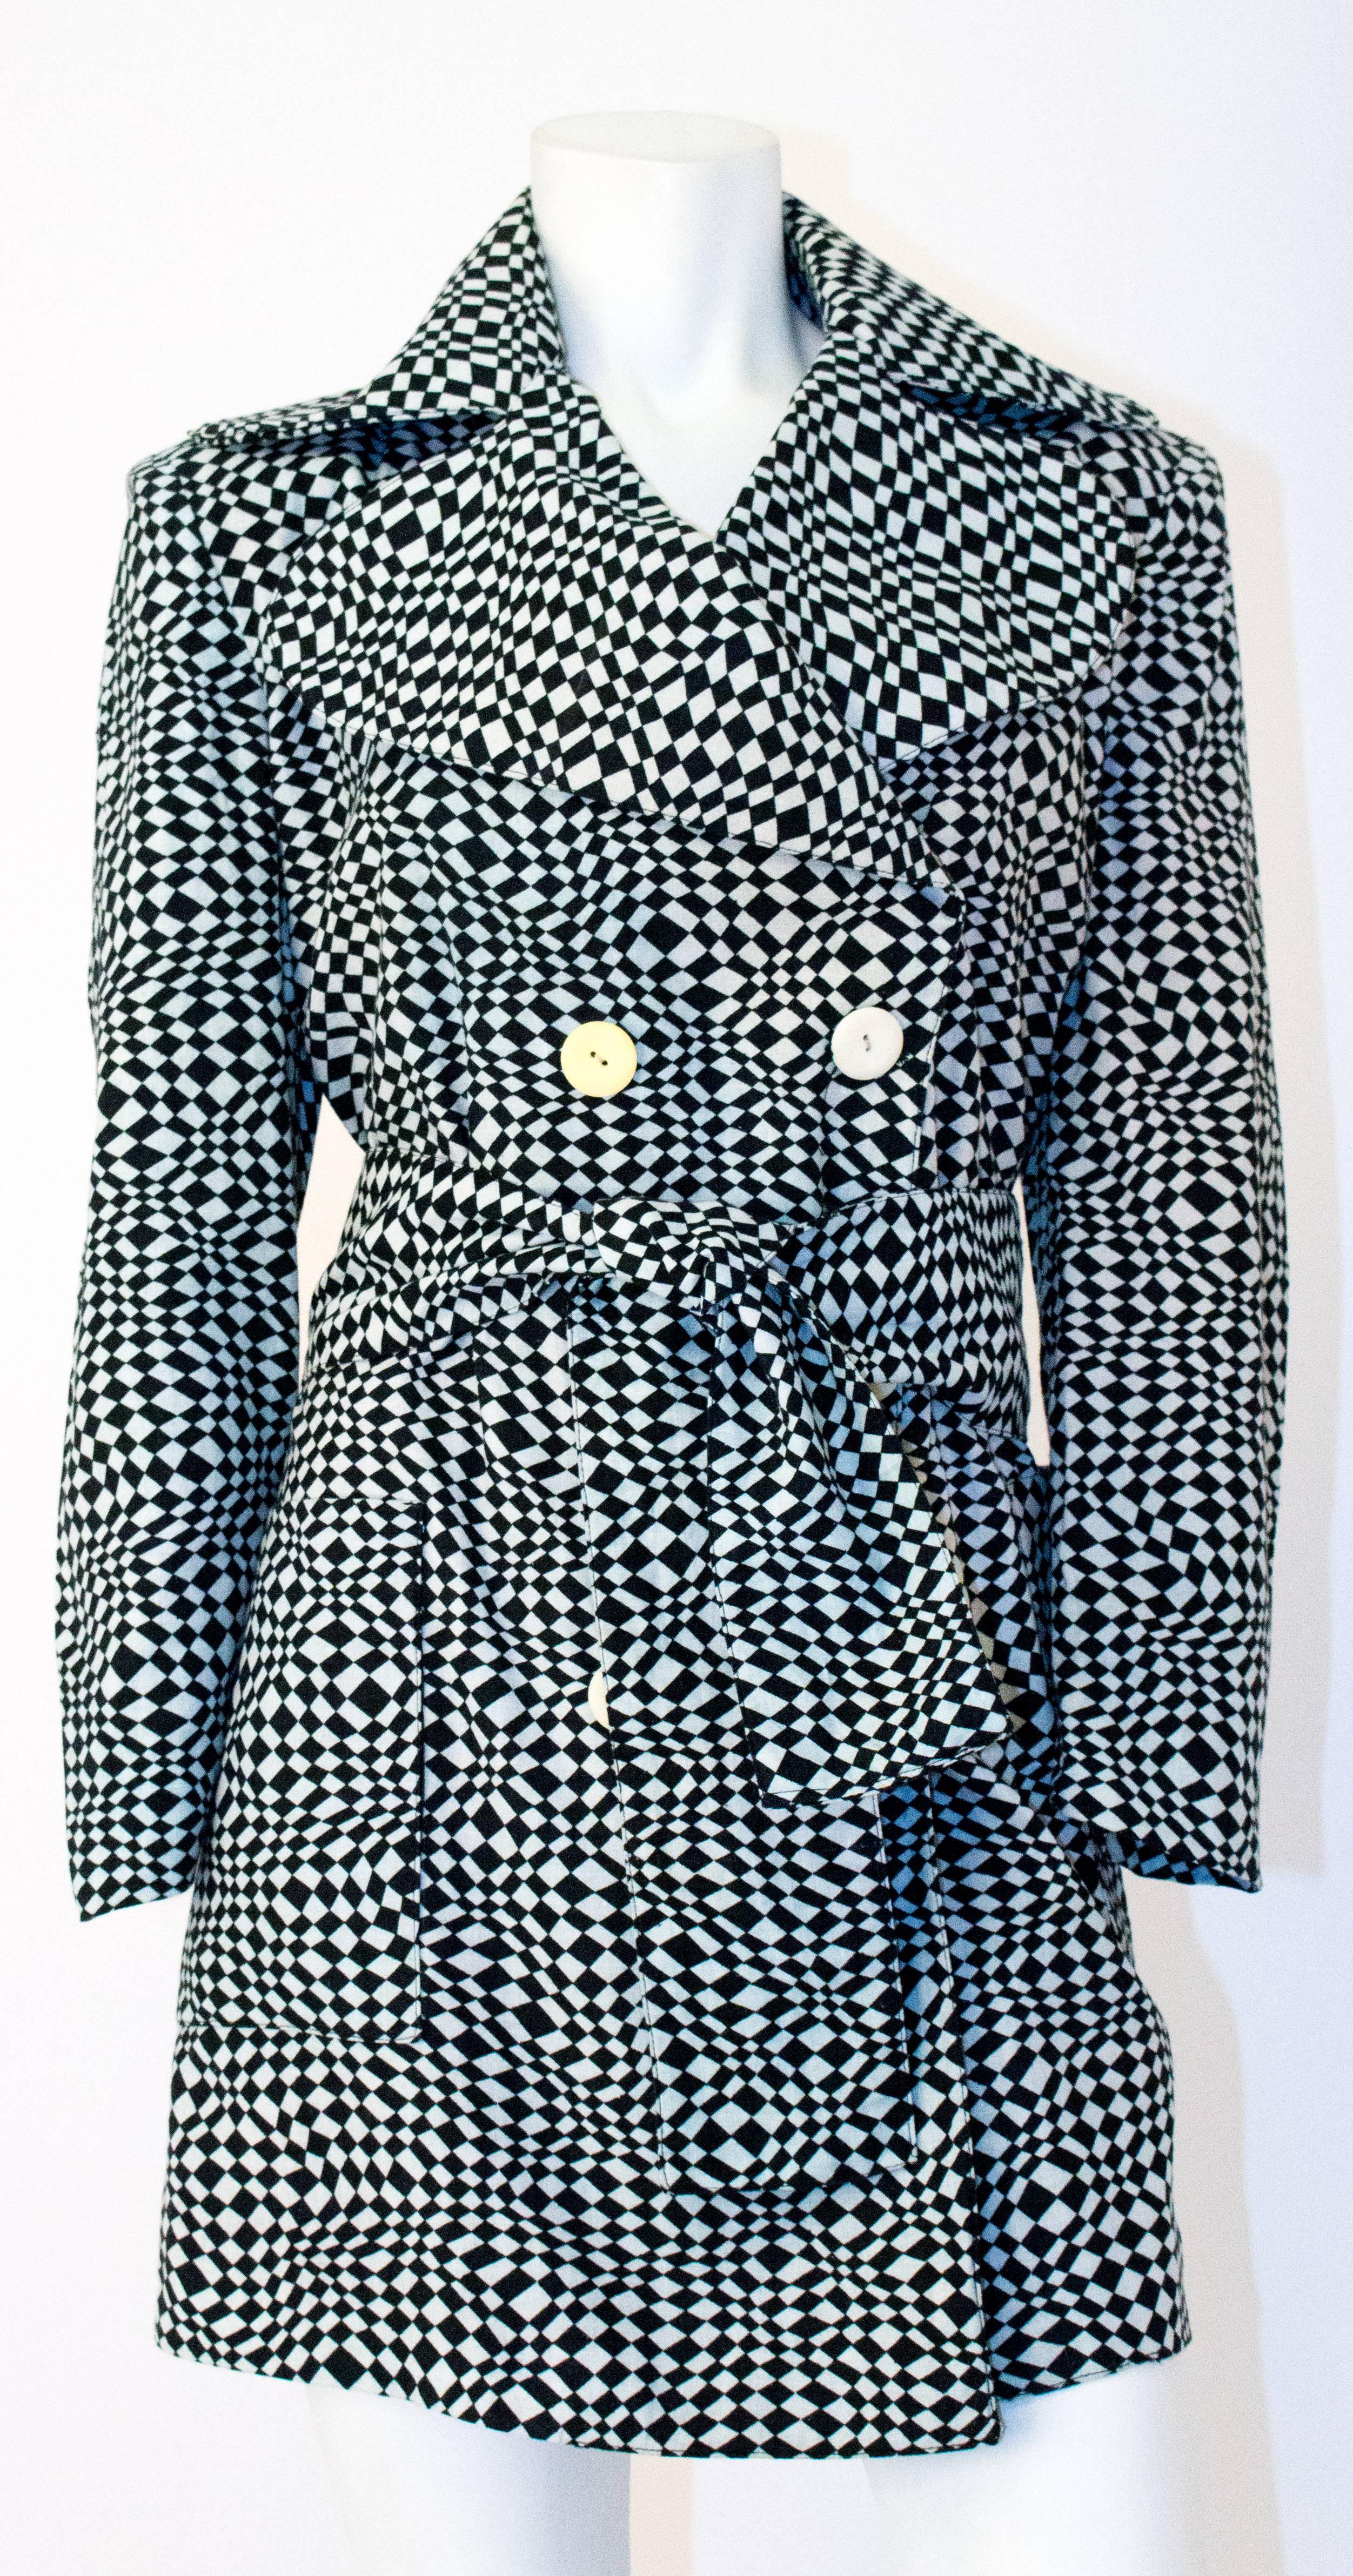 60s Cotton Black & White OP ART Double Breasted Jacket. Mock double breasted. Front patch pockets. Original waist sash. Fully lined. 